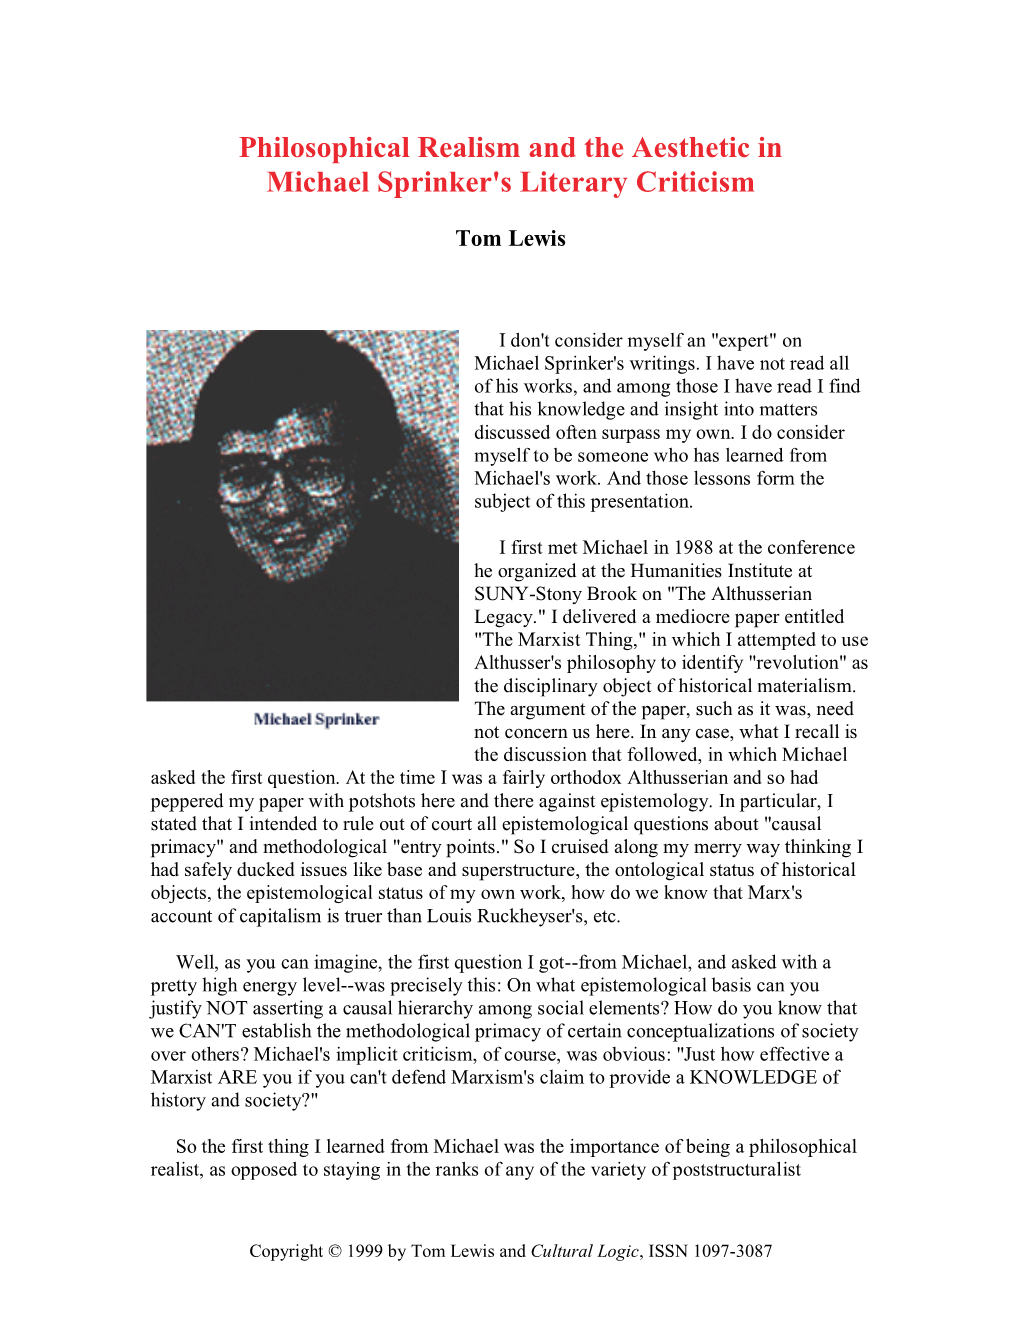 Tom Lewis: "Philosophical Realism & the Aesthetic in Michael Sprinker's